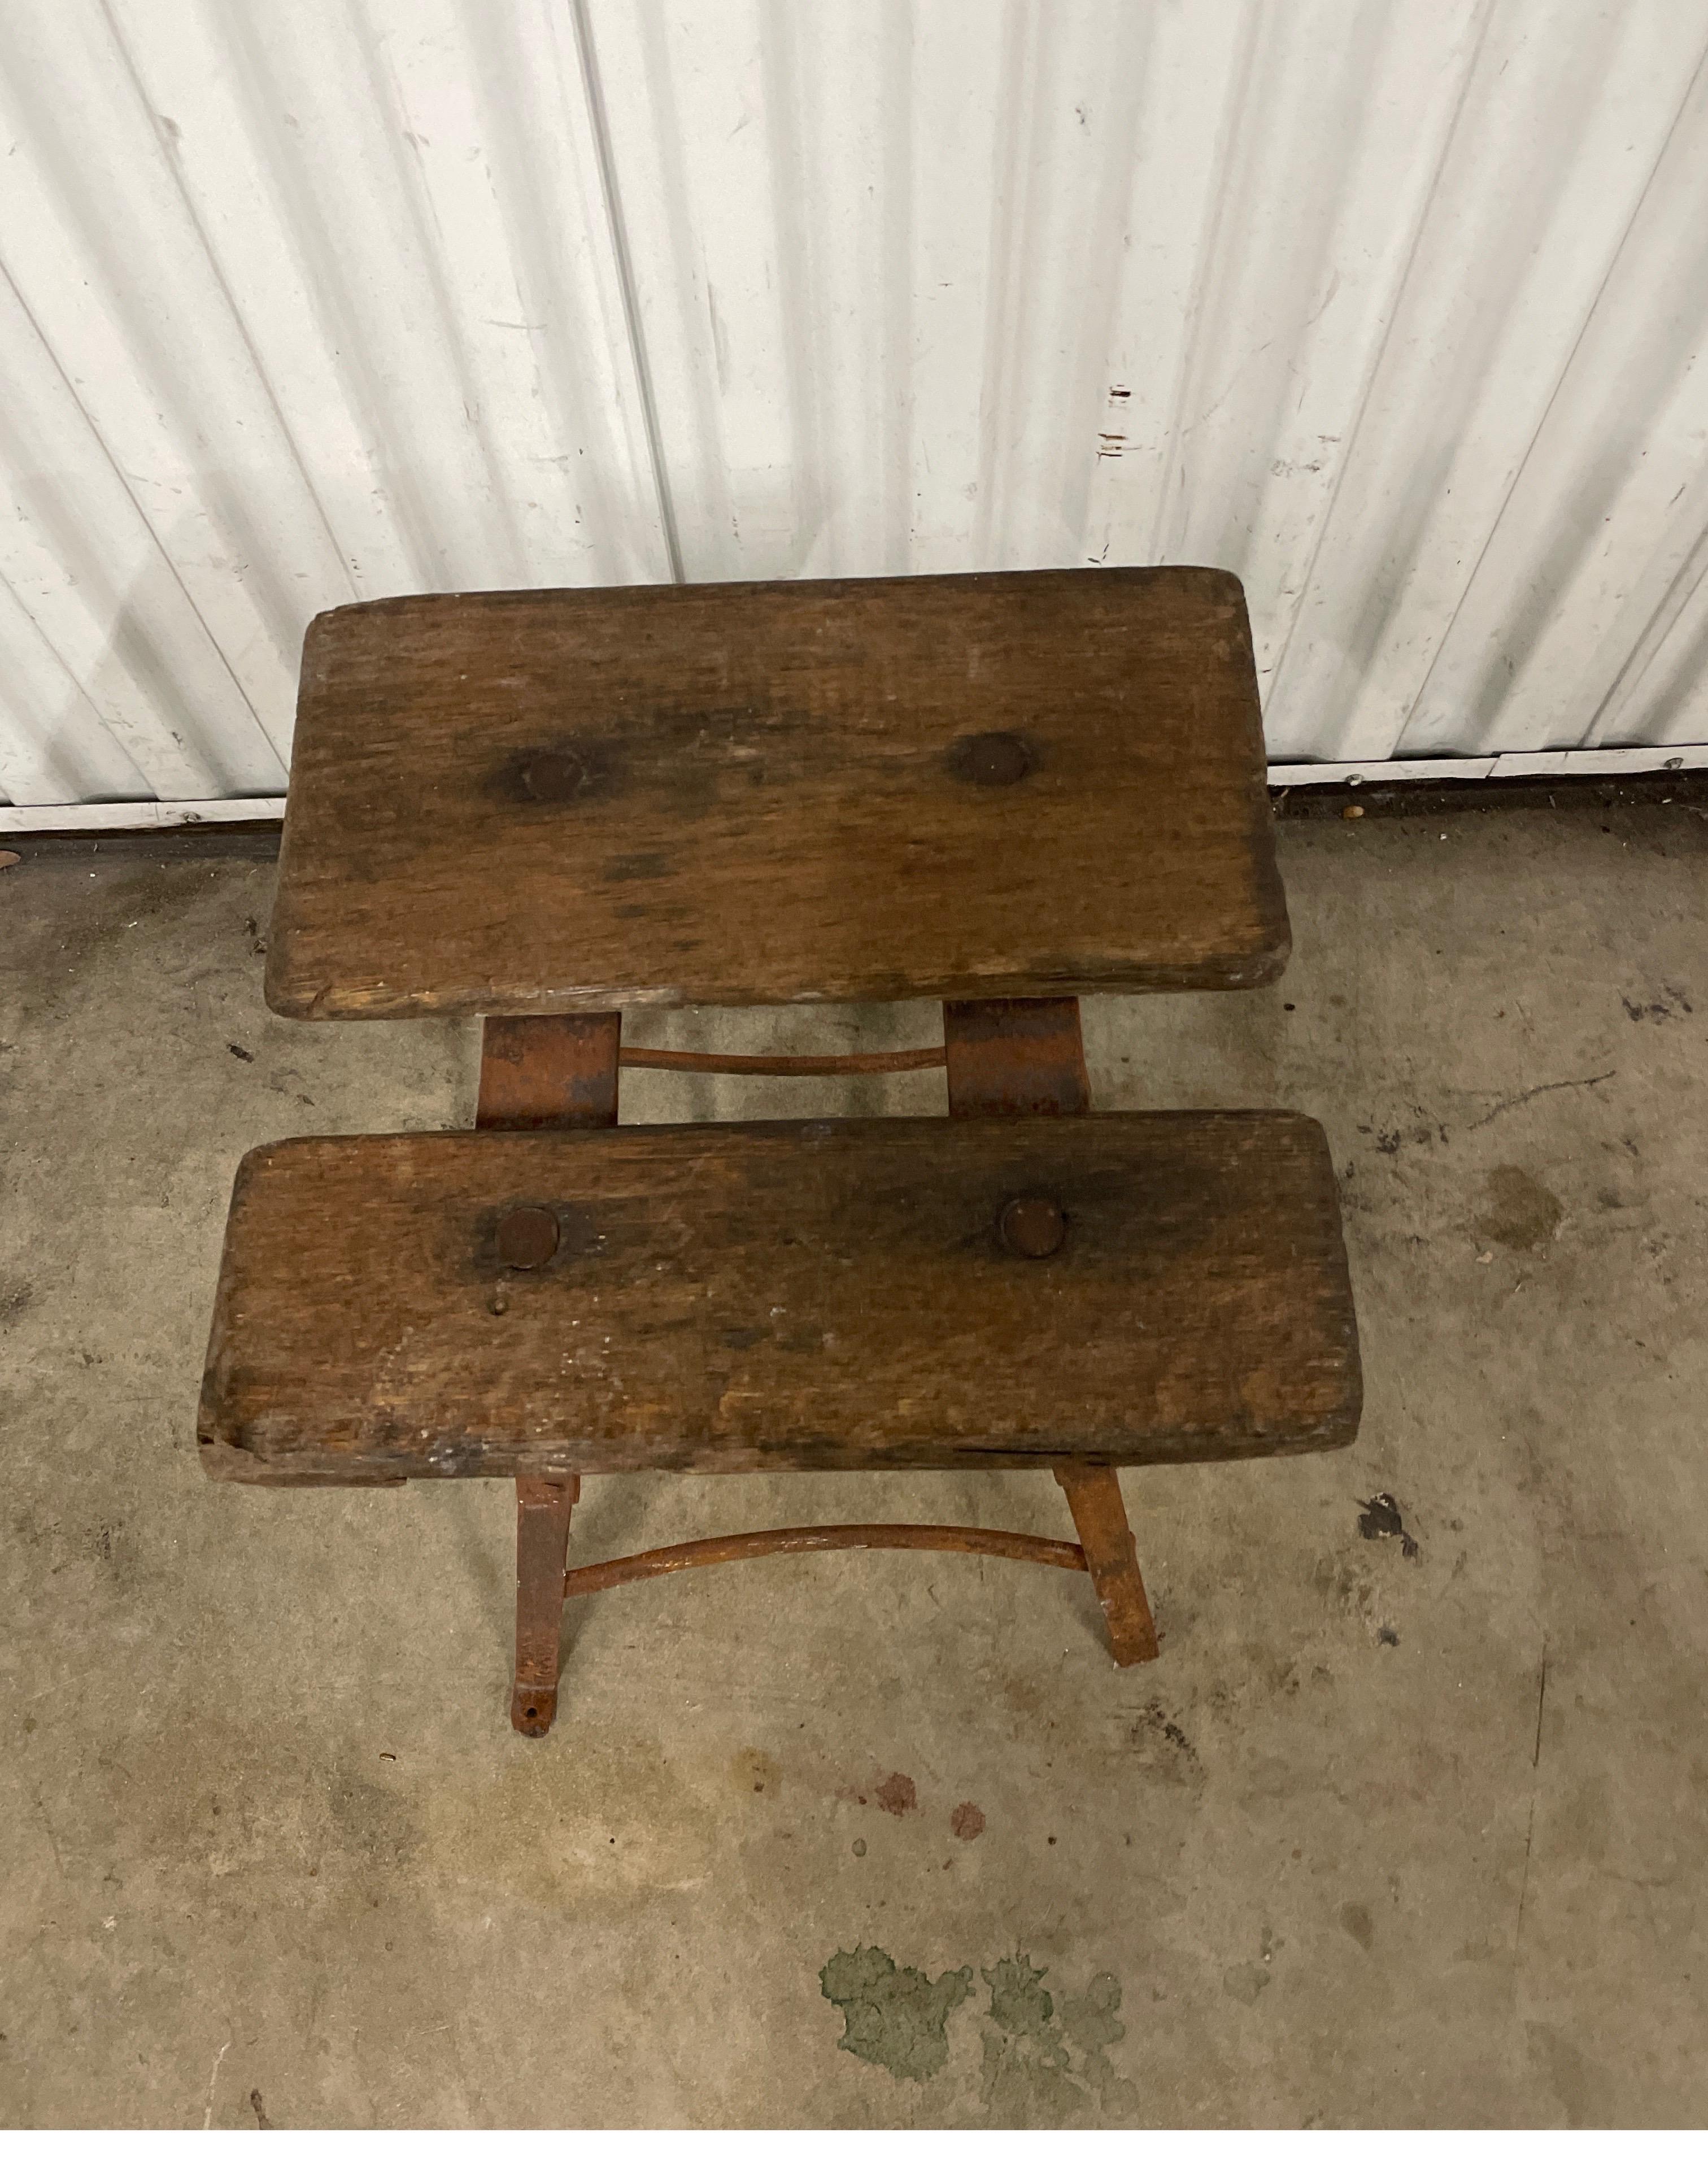 Antique French milking stool comprised of two wood slats on an iron base.
